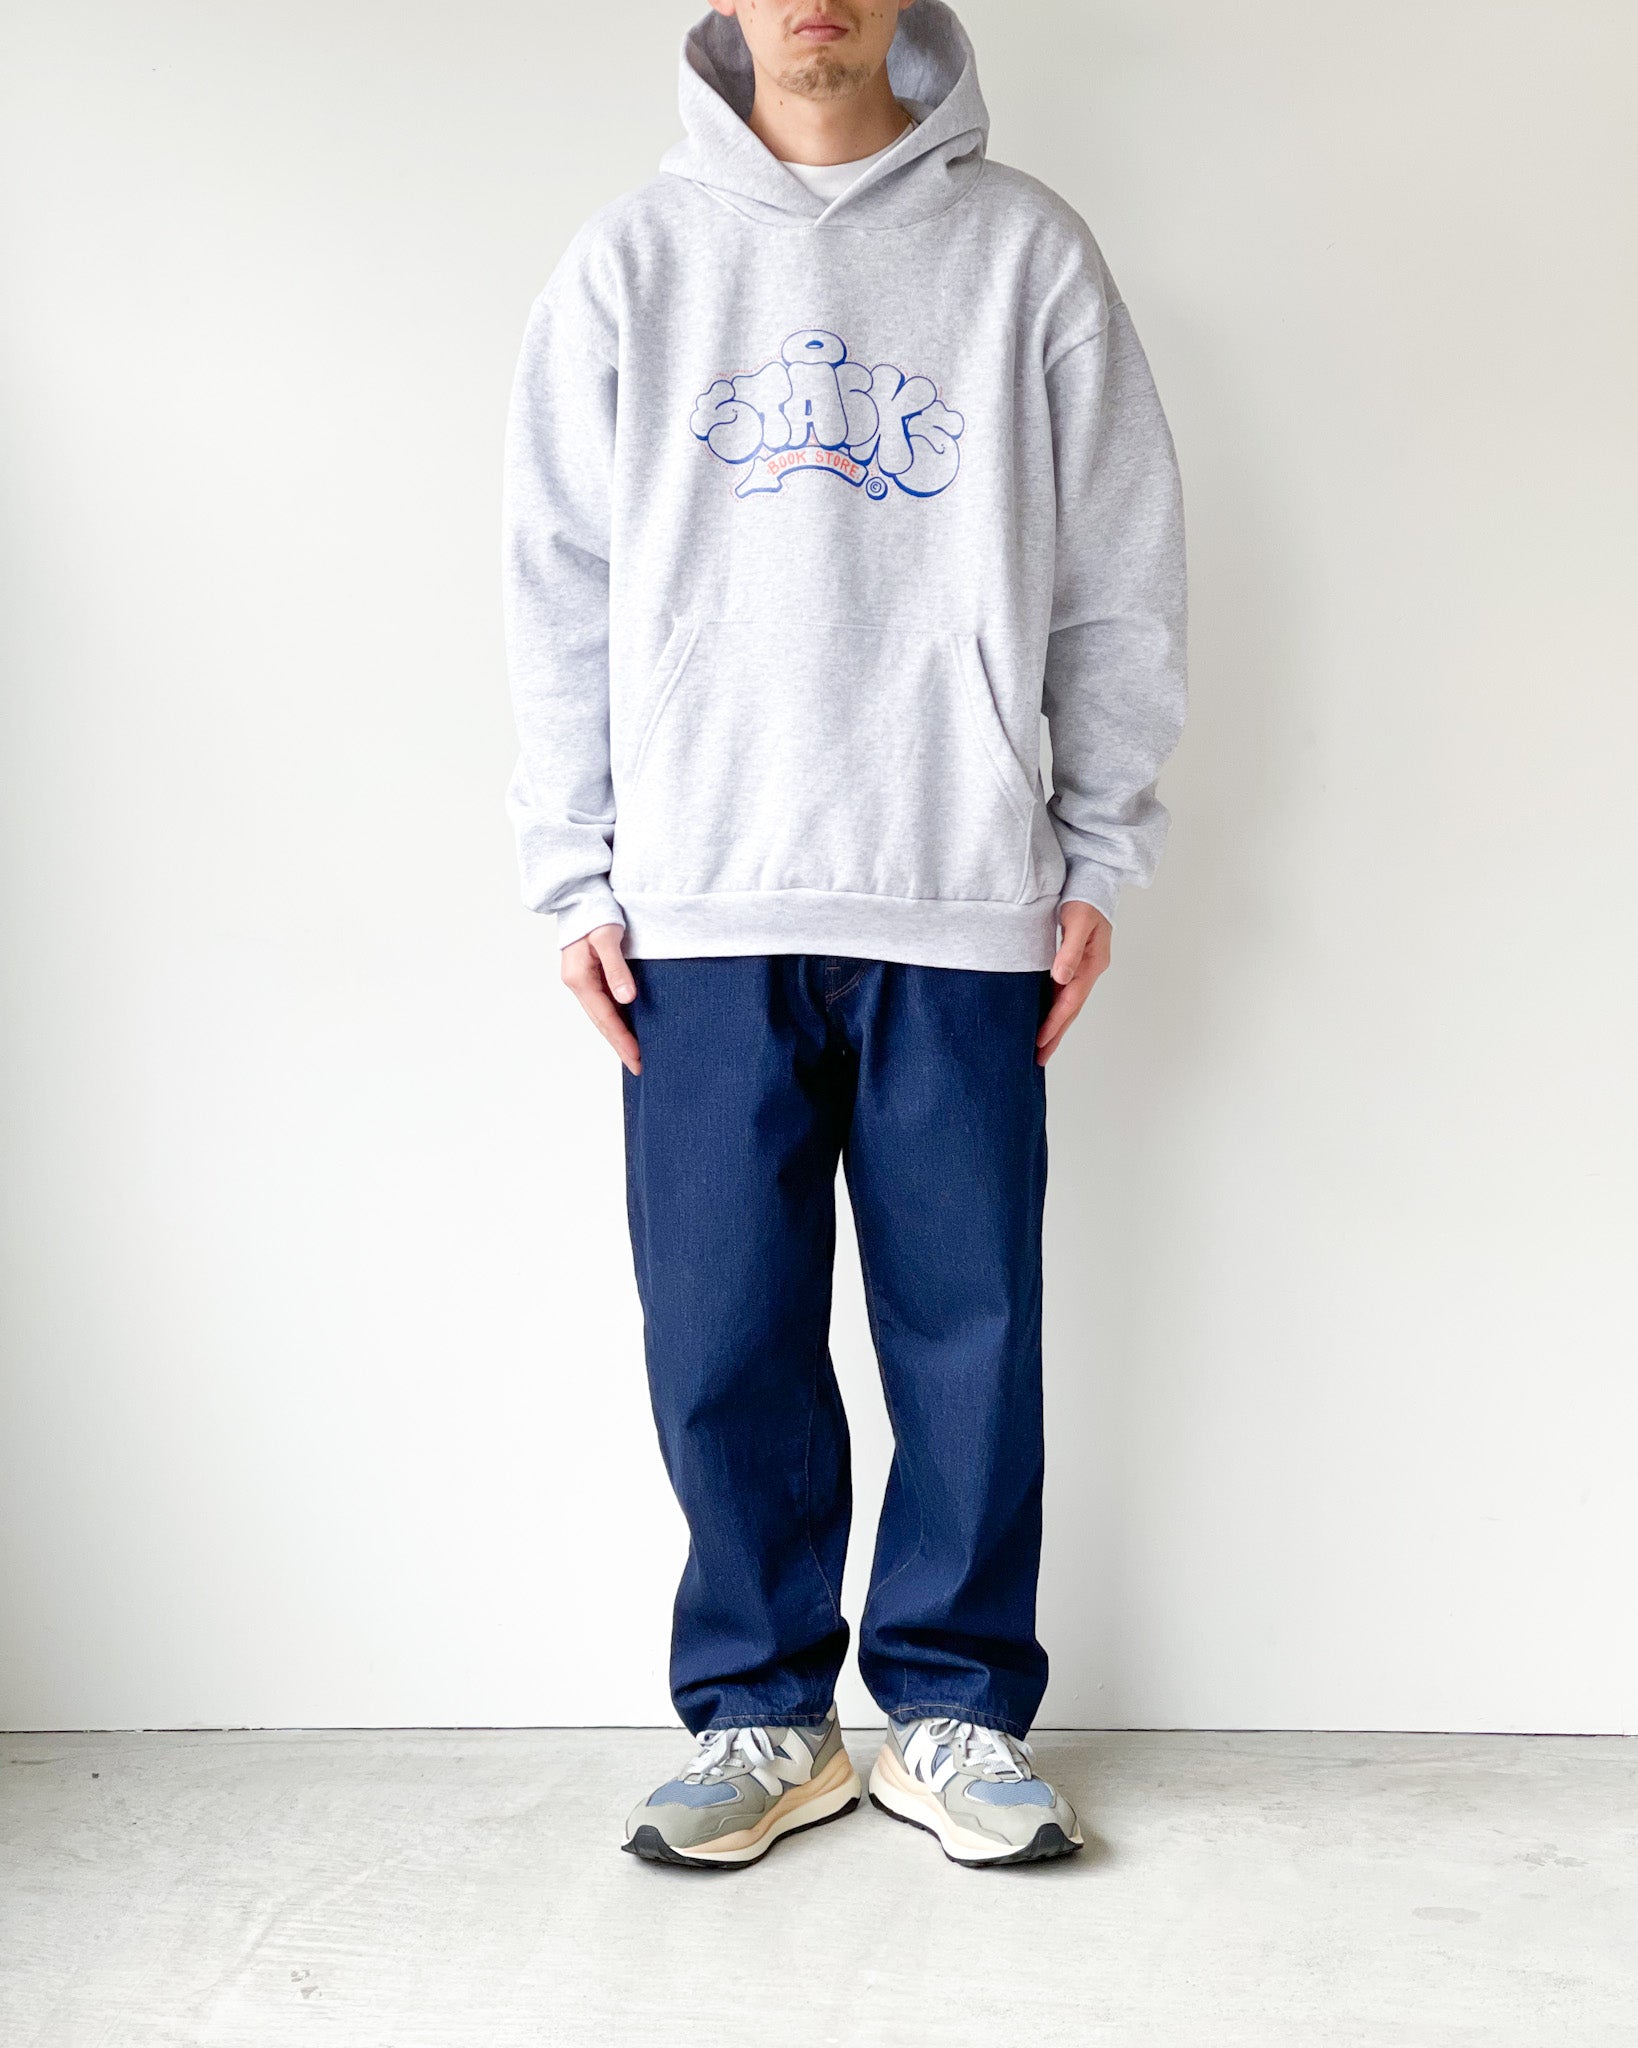 【STACKS】GUESS “THROWUP” HOODIE